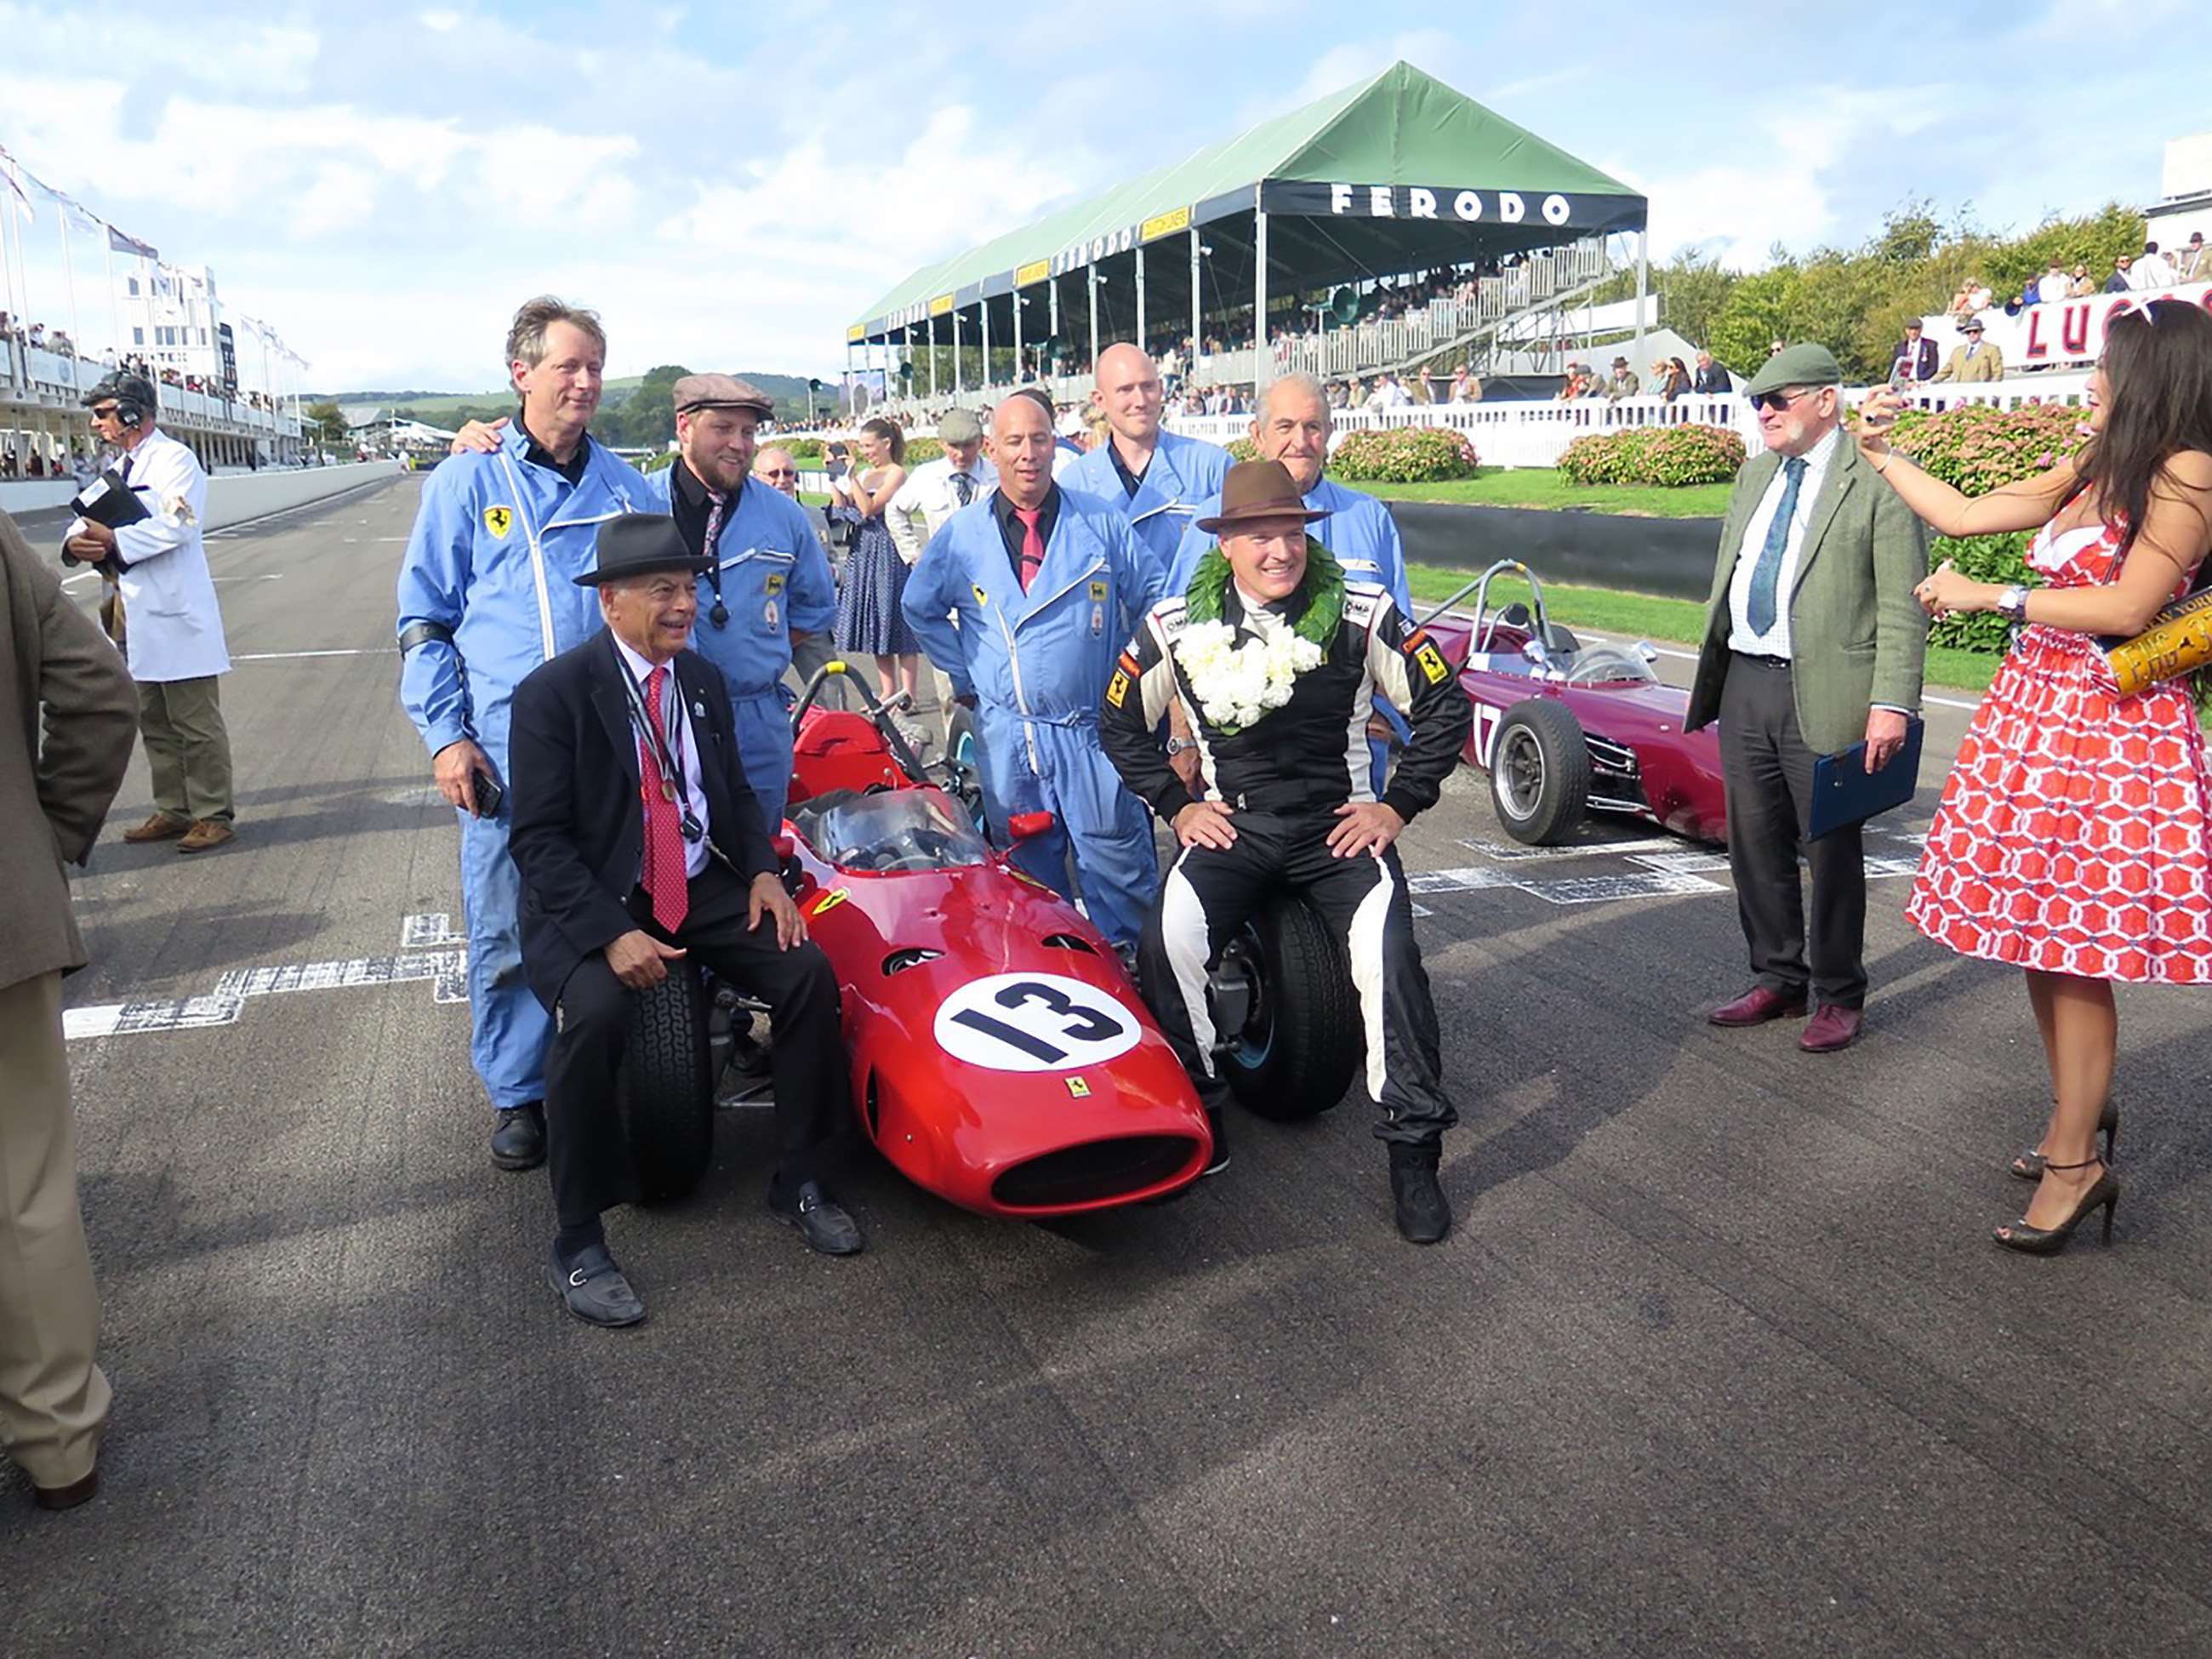 Team celebration after winning the Goodwood revival 2018 Glover Trophy race - on the front wheels owner Laurence Auriana and driver/engineer Joe Colasacco